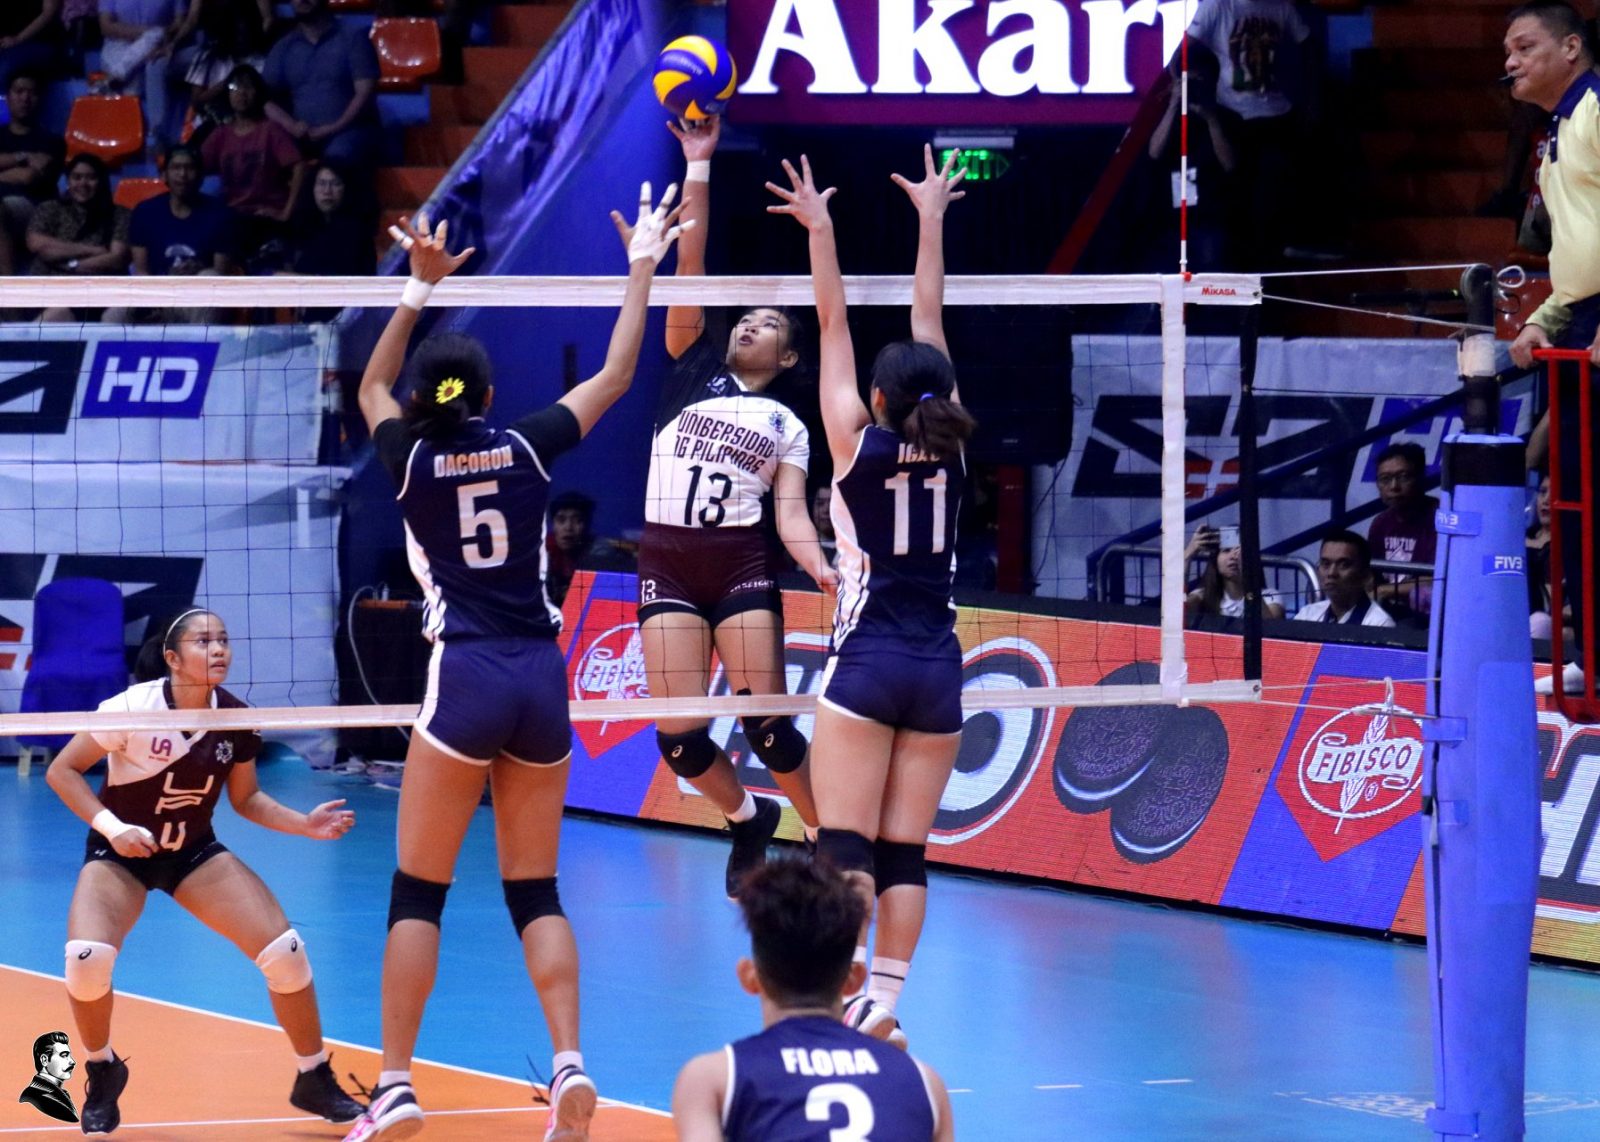 UPWVT ends first round with a win - University of the Philippines Diliman